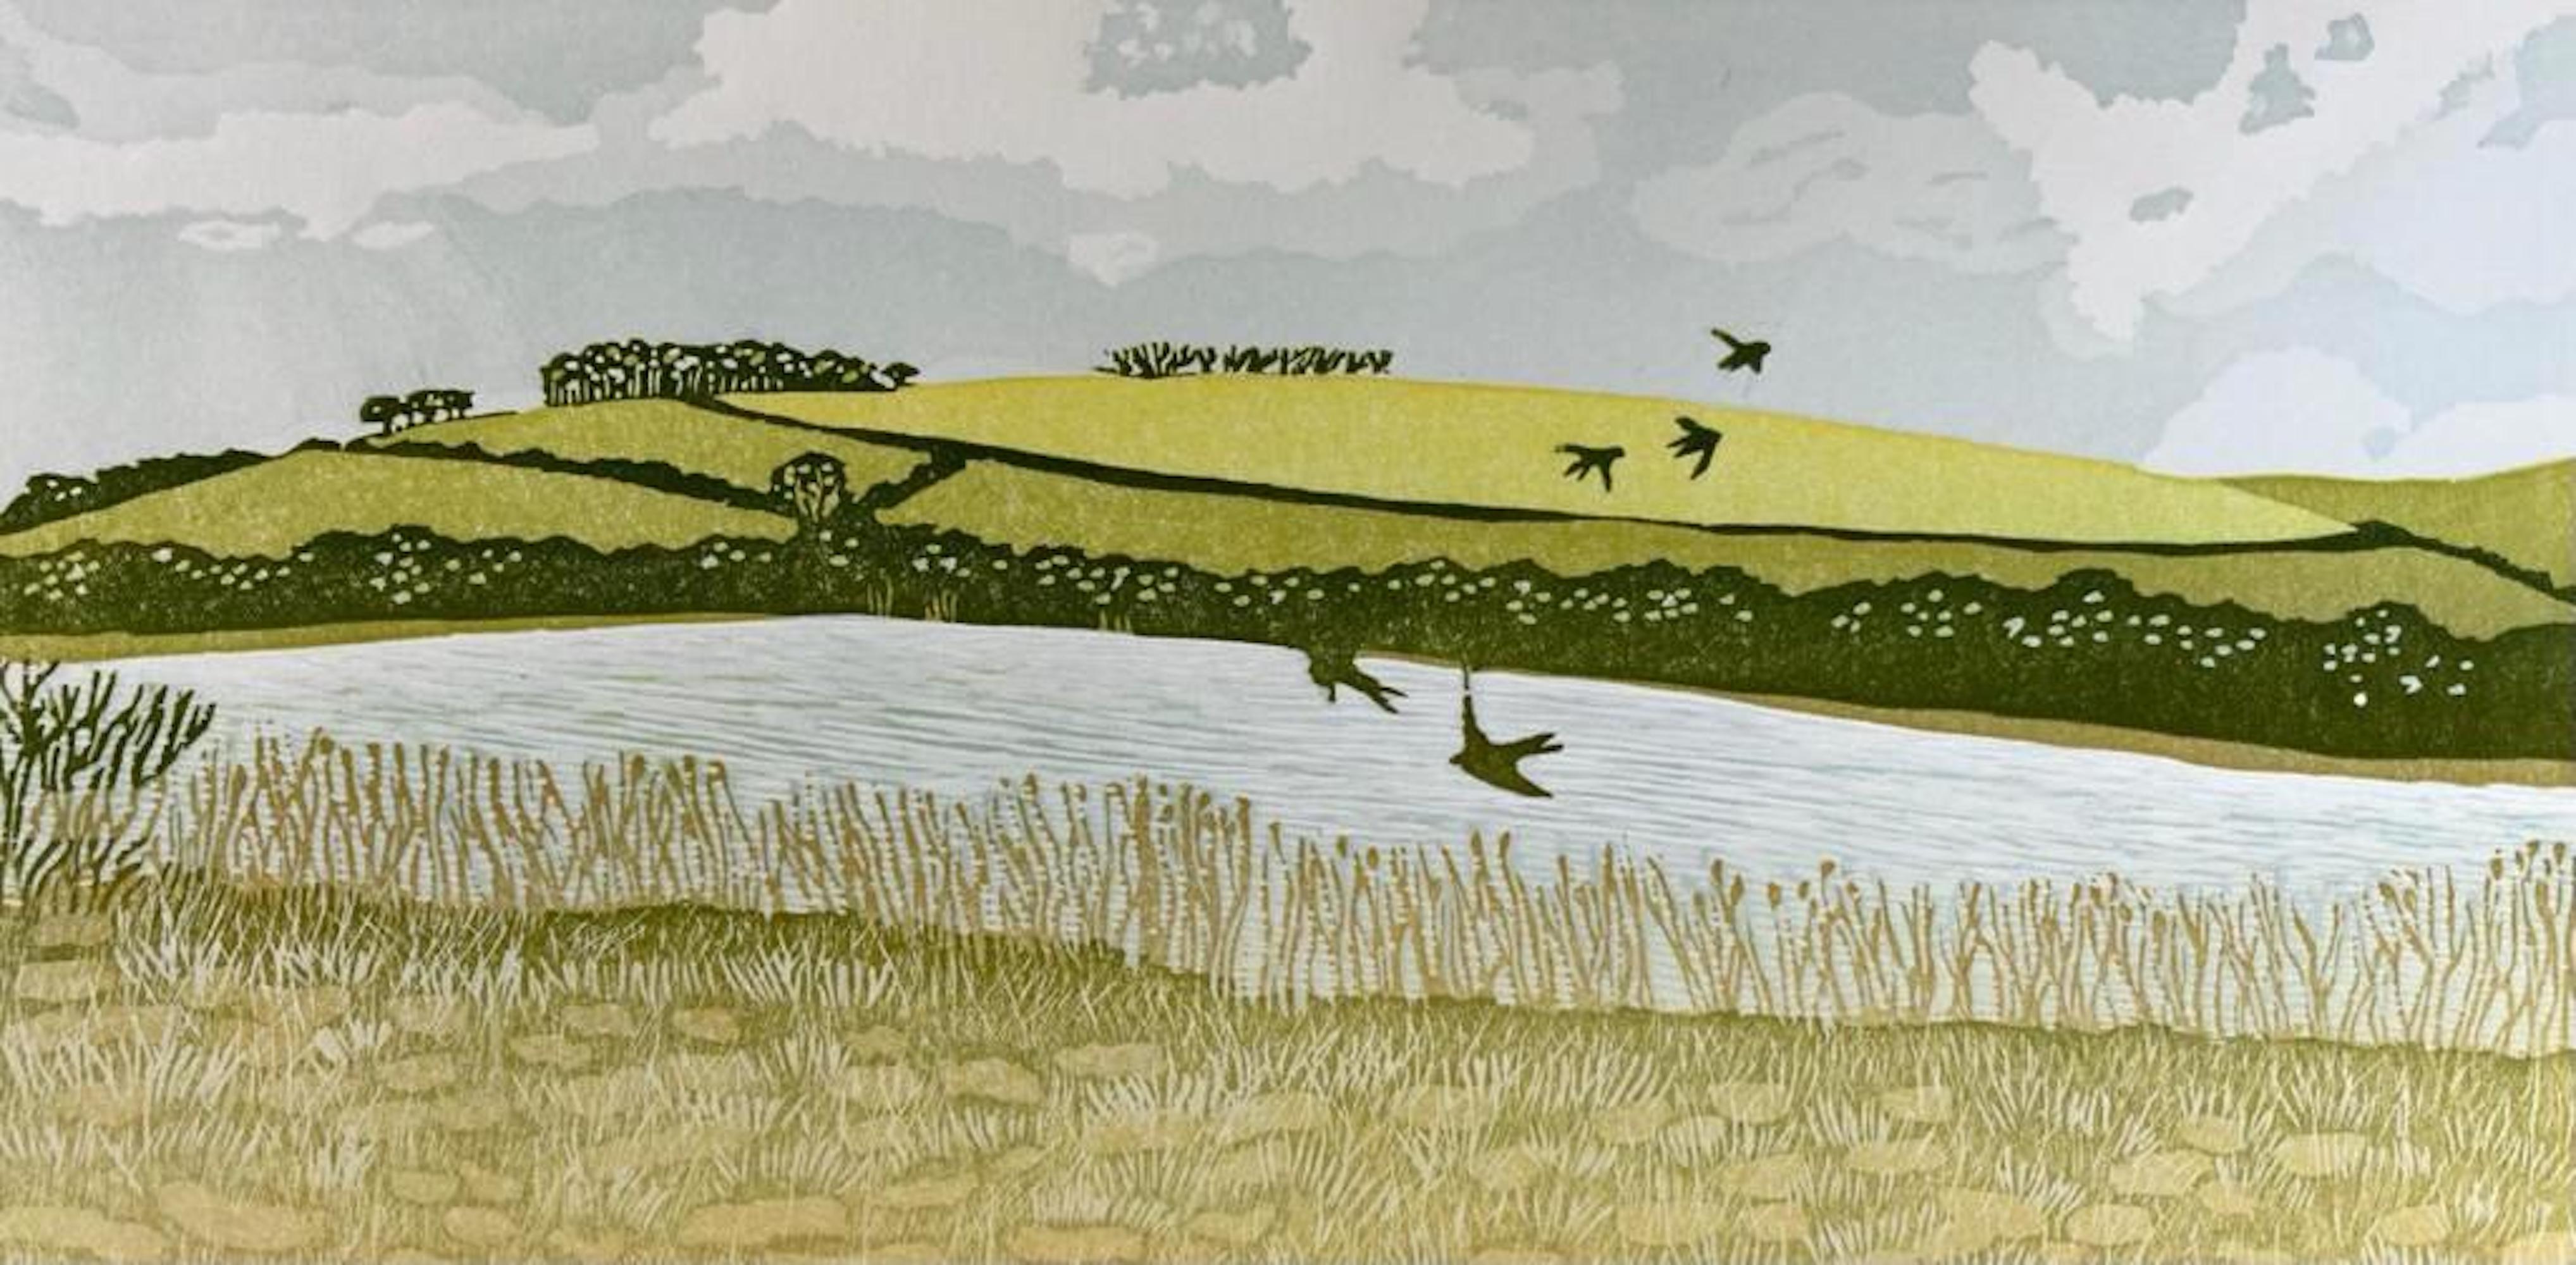 Swallows over the Ley by Ann Burnham [2021]
Signed by the artist
linocut
Edition of 10
Image size: H:16cm cm x W:30cm cm
Complete Size of Unframed Work: H:28cm cm x W:48cm cm x D:3cm
Please note that insitu images are purely an indication of how a